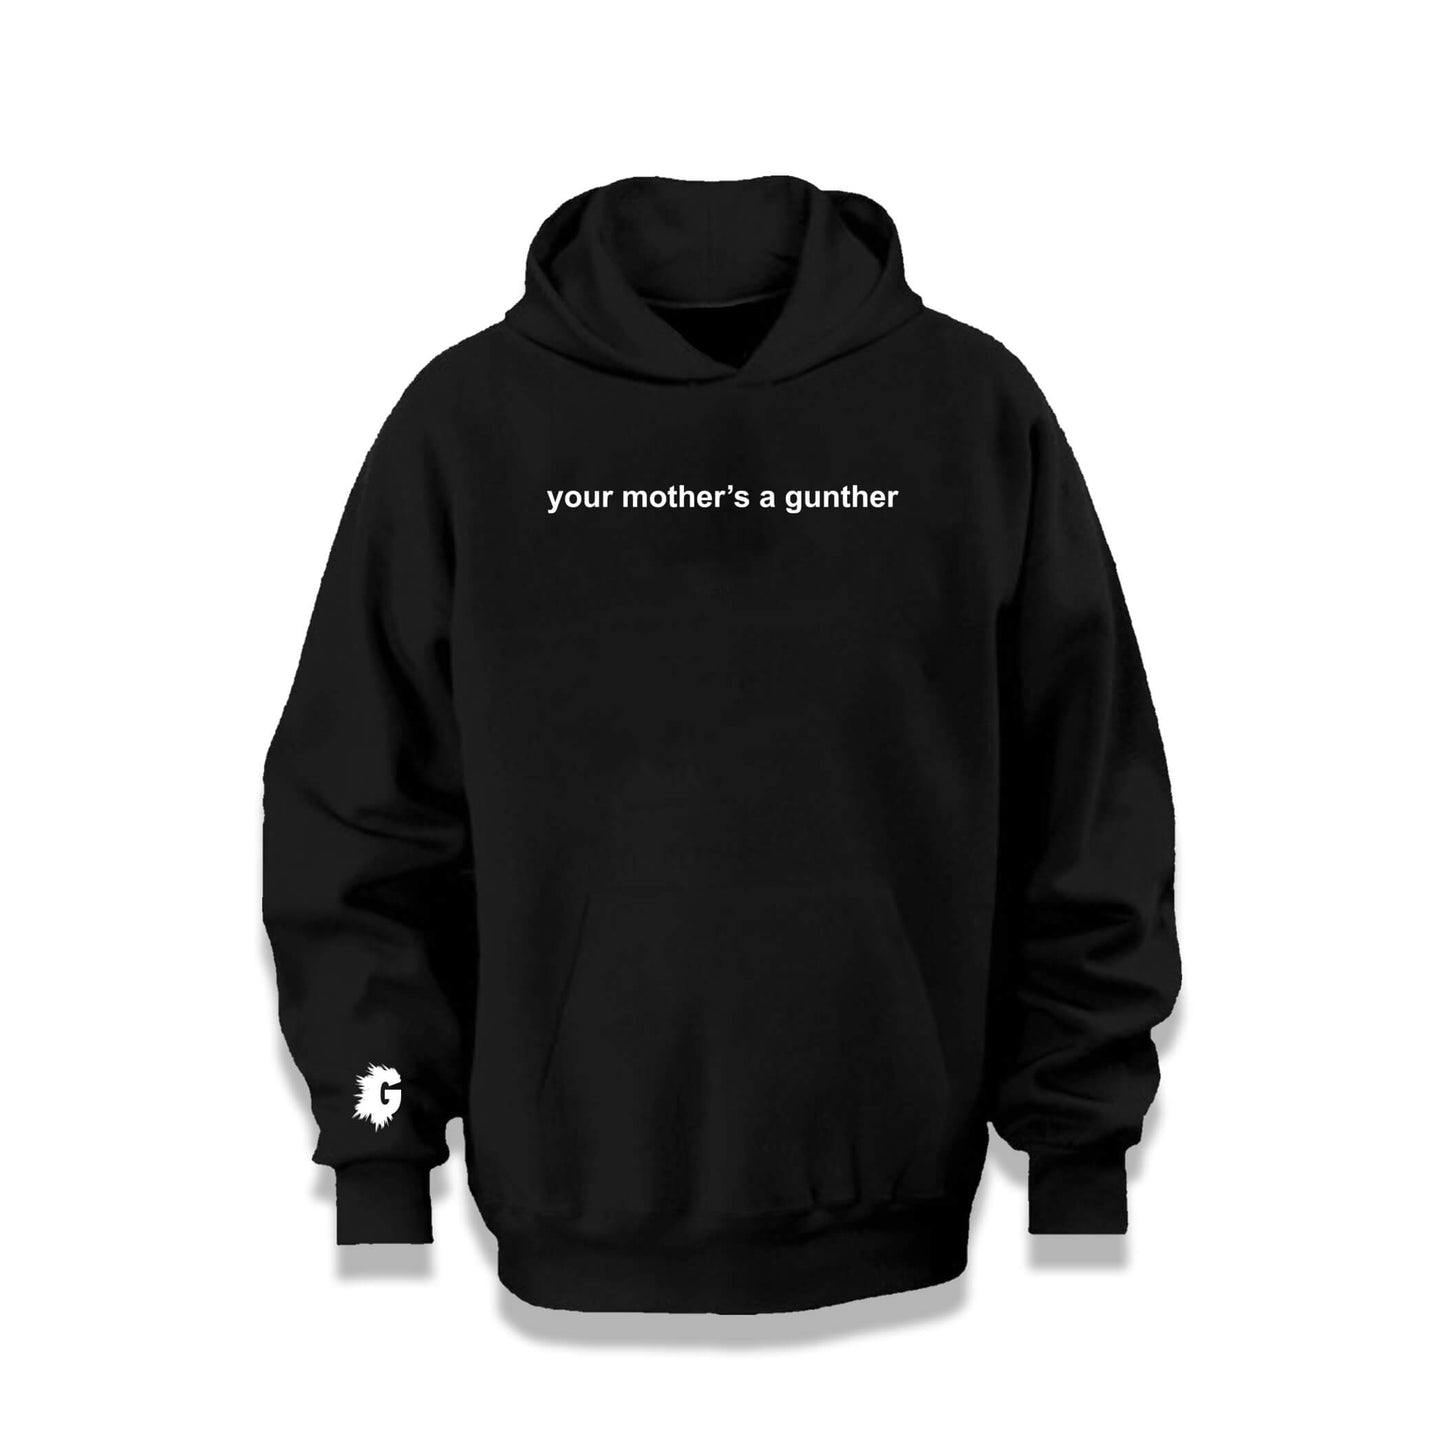 YOUR MOTHER'S A GUNTHER HOODY